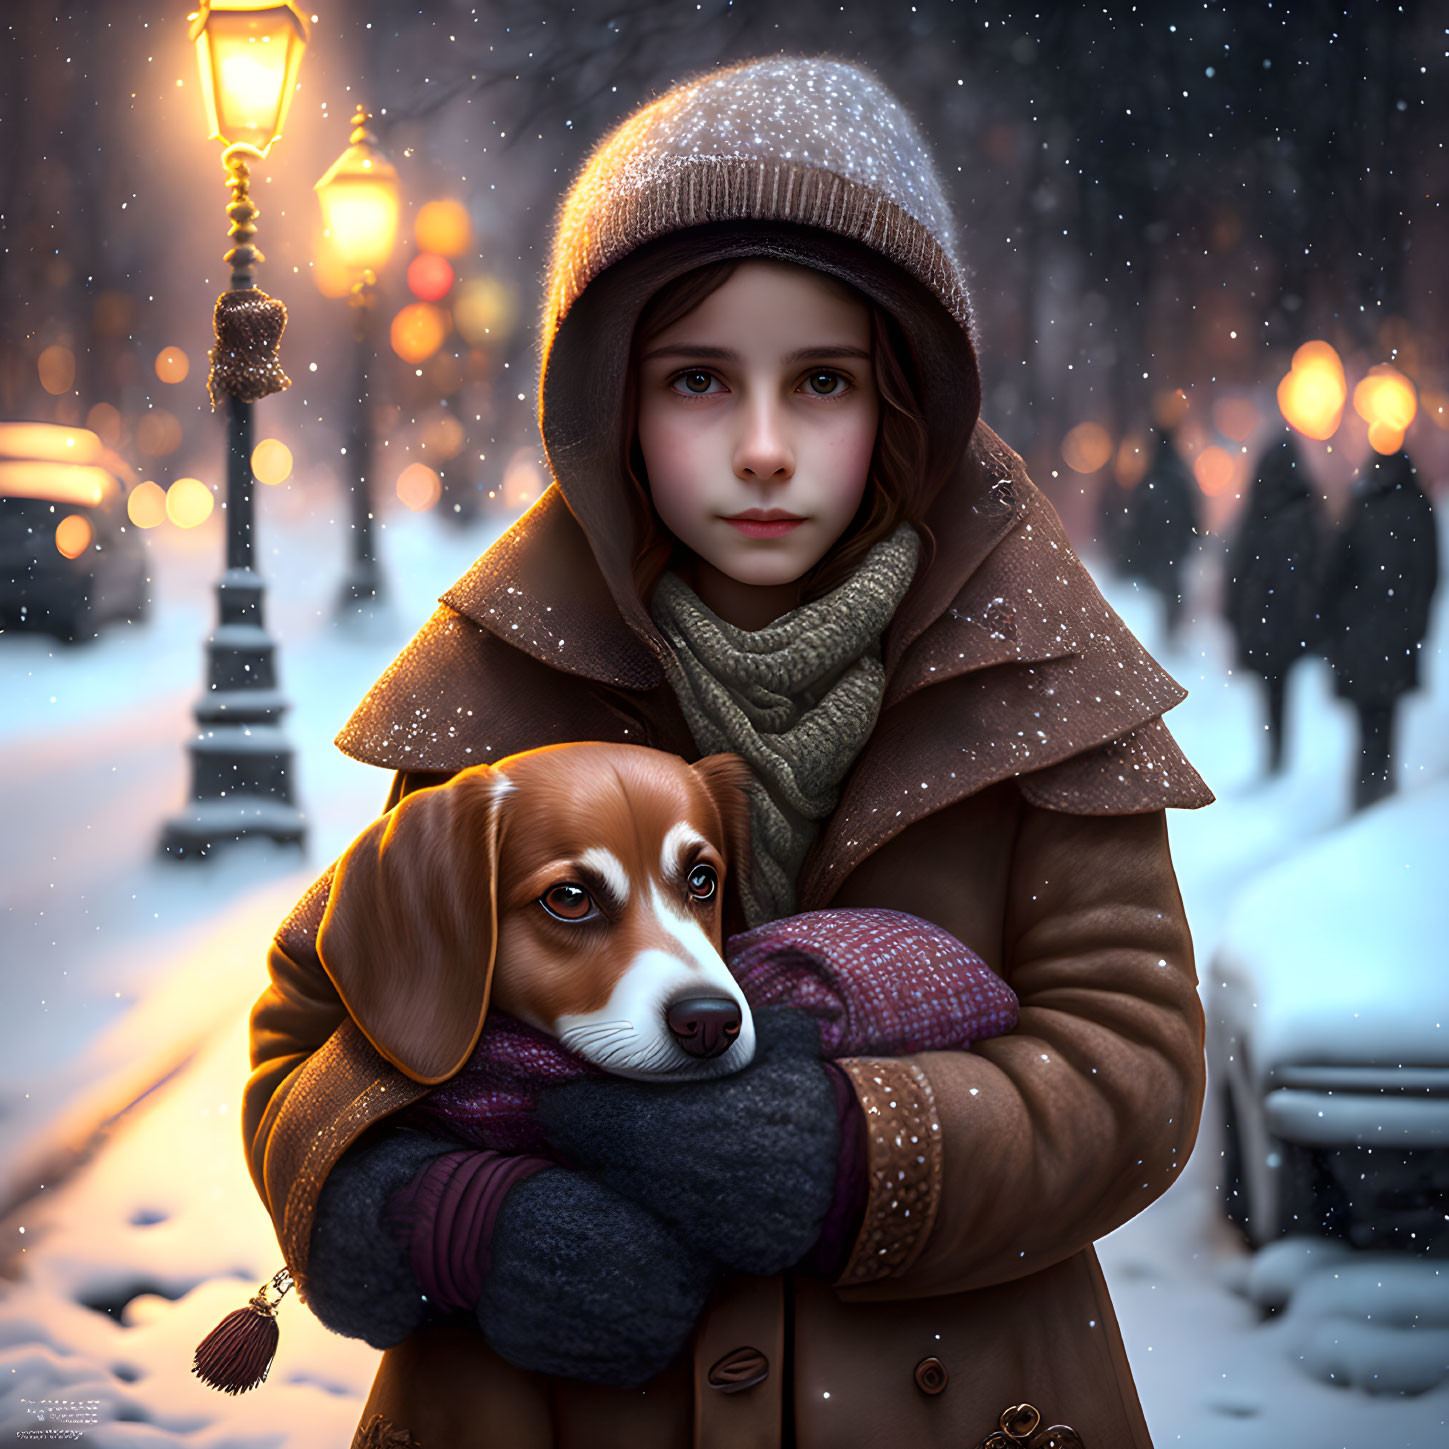 Child in Winter Clothing Holding Dog in Snowy Evening Scene